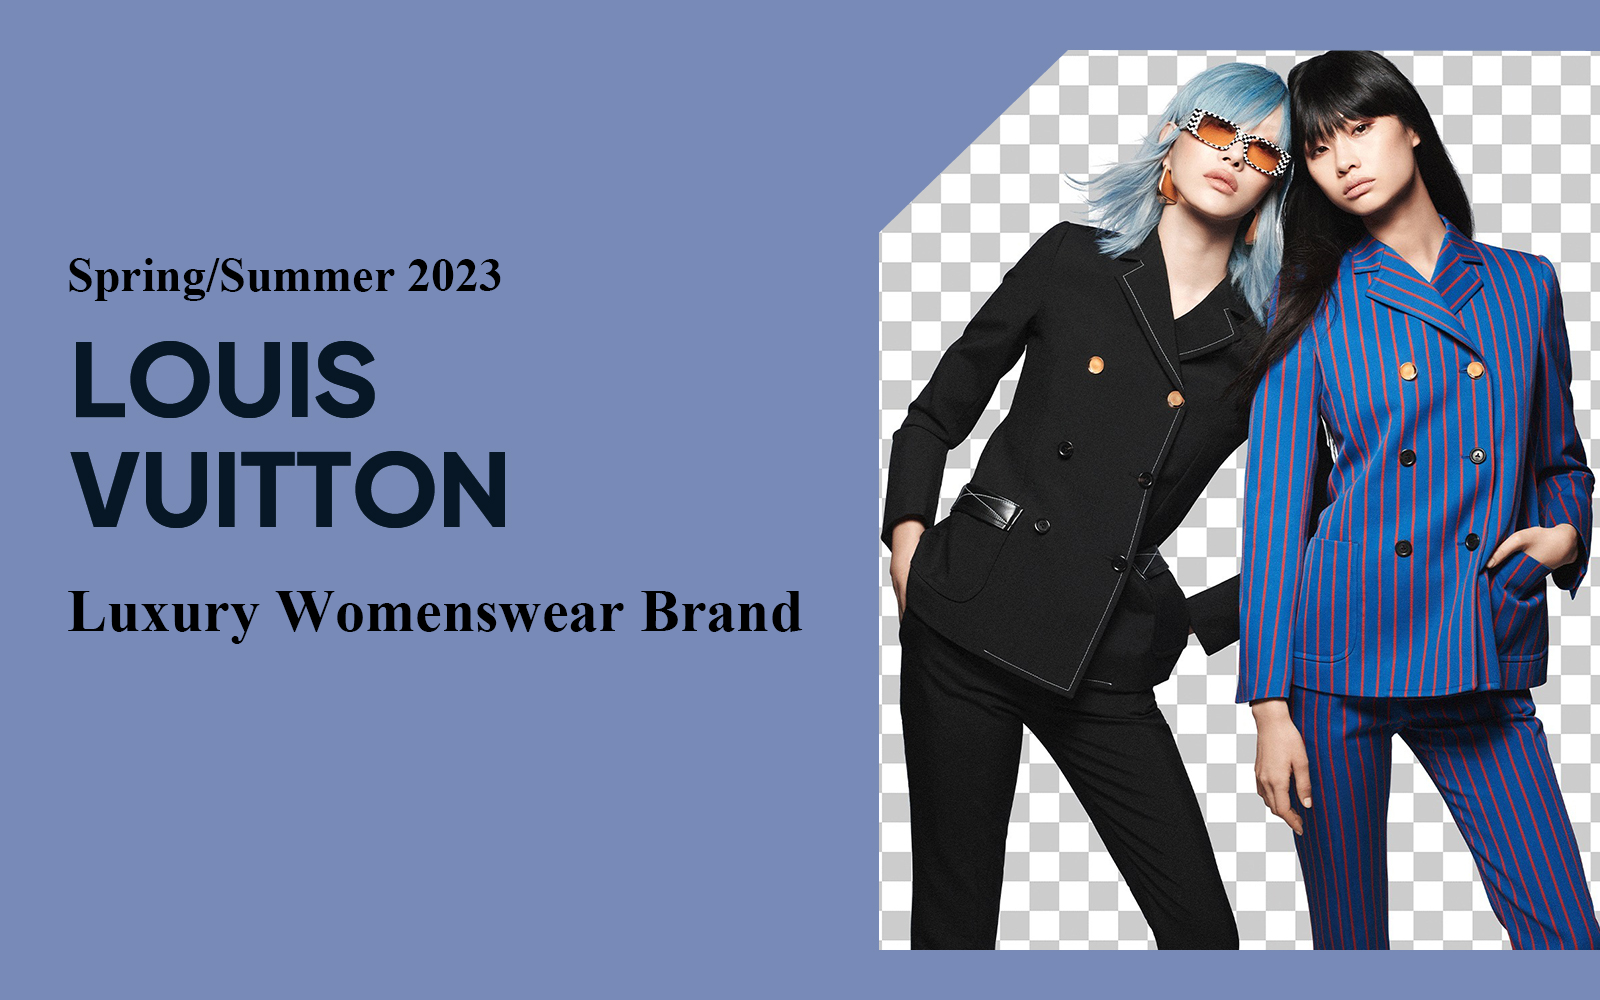 Practical Modernity -- The Analysis of Louis Vuitton The Luxury Womenswear Brand